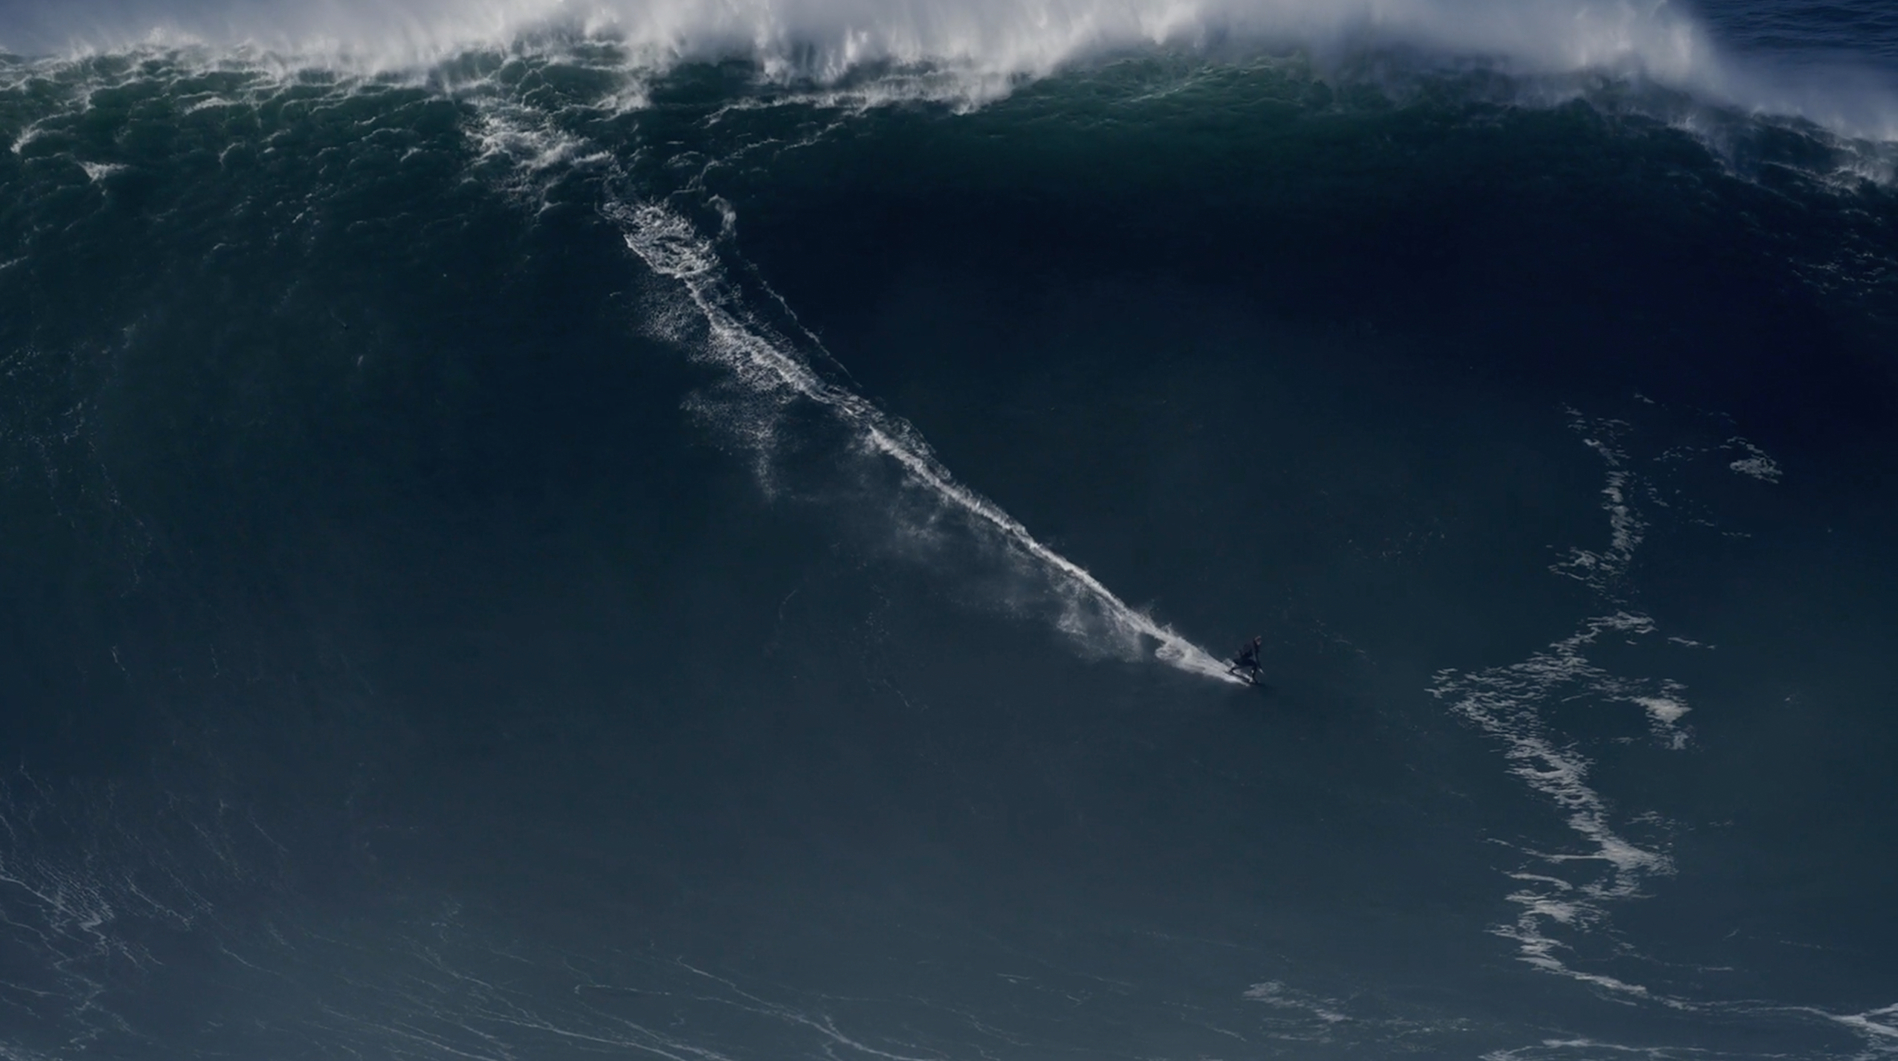 100 Foot Wave Companion Podcast film featured shot.